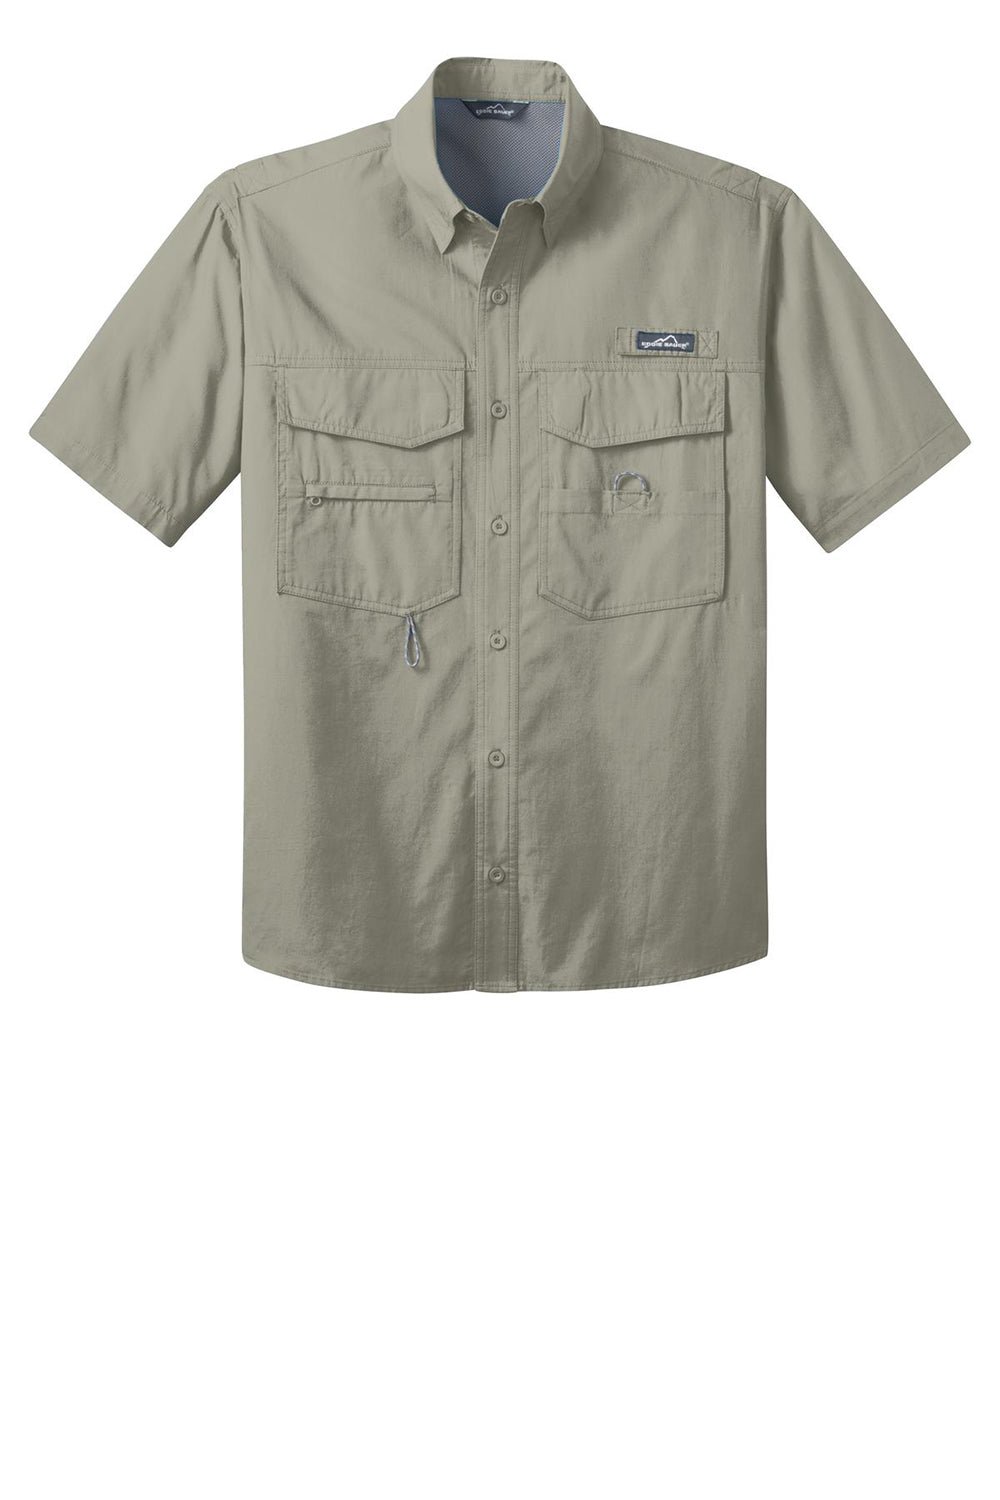 Eddie Bauer EB608 Mens Fishing Short Sleeve Button Down Shirt w/ Double Pockets Driftwood Flat Front